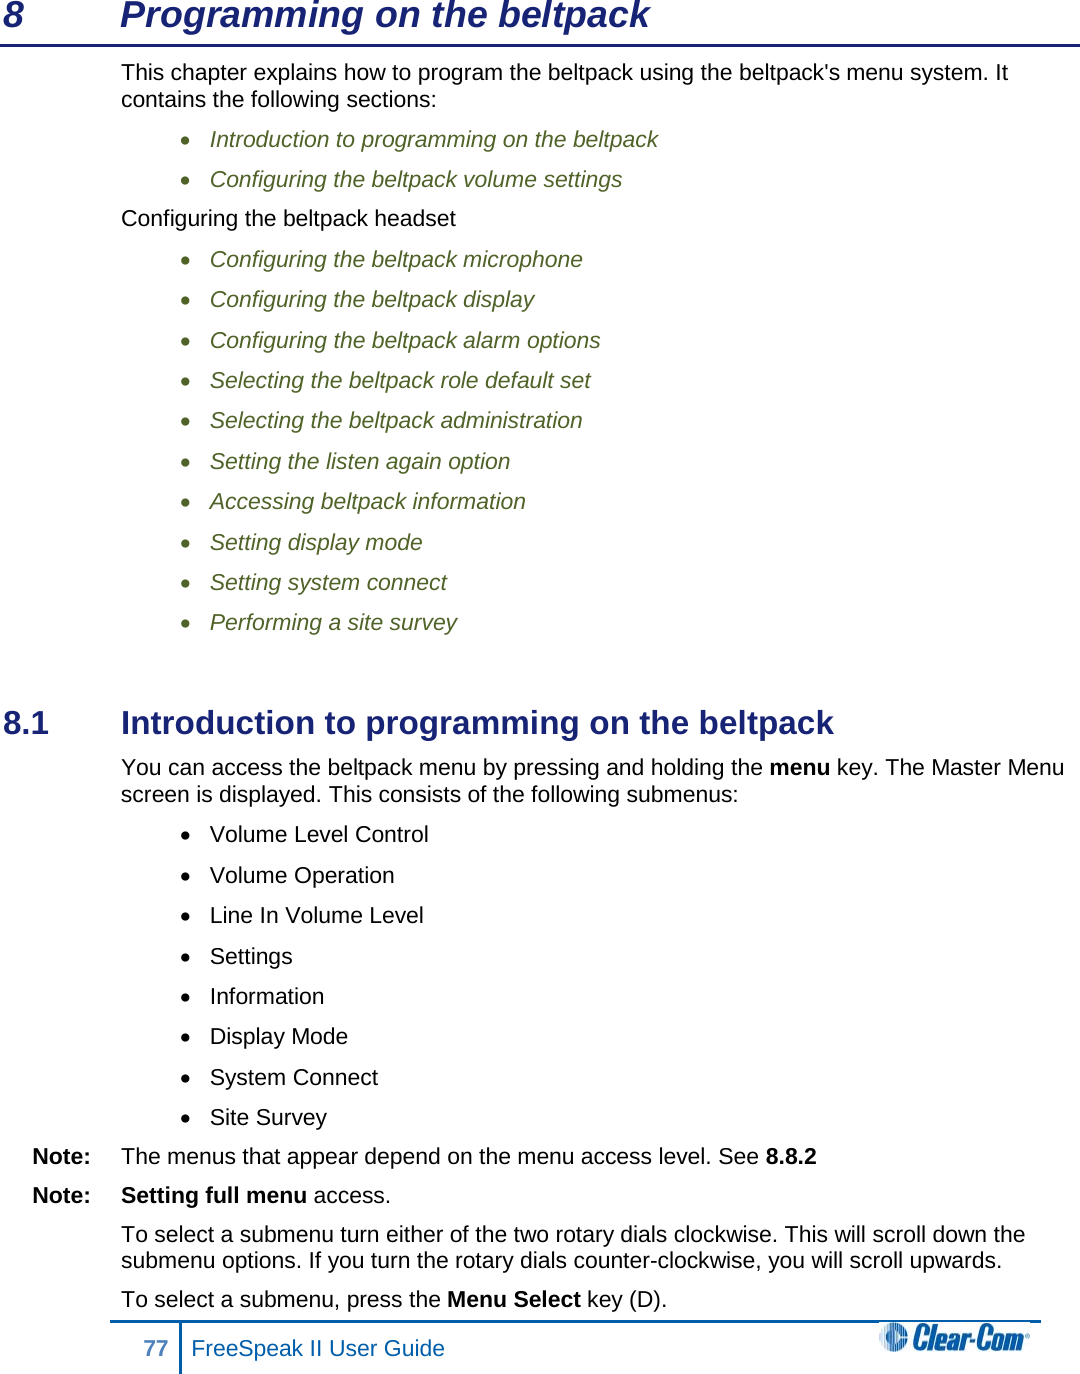 8  Programming on the beltpack This chapter explains how to program the beltpack using the beltpack&apos;s menu system. It contains the following sections: • Introduction to programming on the beltpack • Configuring the beltpack volume settings Configuring the beltpack headset • Configuring the beltpack microphone • Configuring the beltpack display • Configuring the beltpack alarm options • Selecting the beltpack role default set • Selecting the beltpack administration • Setting the listen again option  • Accessing beltpack information • Setting display mode • Setting system connect • Performing a site survey  8.1  Introduction to programming on the beltpack You can access the beltpack menu by pressing and holding the menu key. The Master Menu screen is displayed. This consists of the following submenus: • Volume Level Control • Volume Operation • Line In Volume Level • Settings • Information • Display Mode • System Connect • Site Survey Note: The menus that appear depend on the menu access level. See 8.8.2  Note: Setting full menu access. To select a submenu turn either of the two rotary dials clockwise. This will scroll down the submenu options. If you turn the rotary dials counter-clockwise, you will scroll upwards.  To select a submenu, press the Menu Select key (D). 77 FreeSpeak II User Guide  